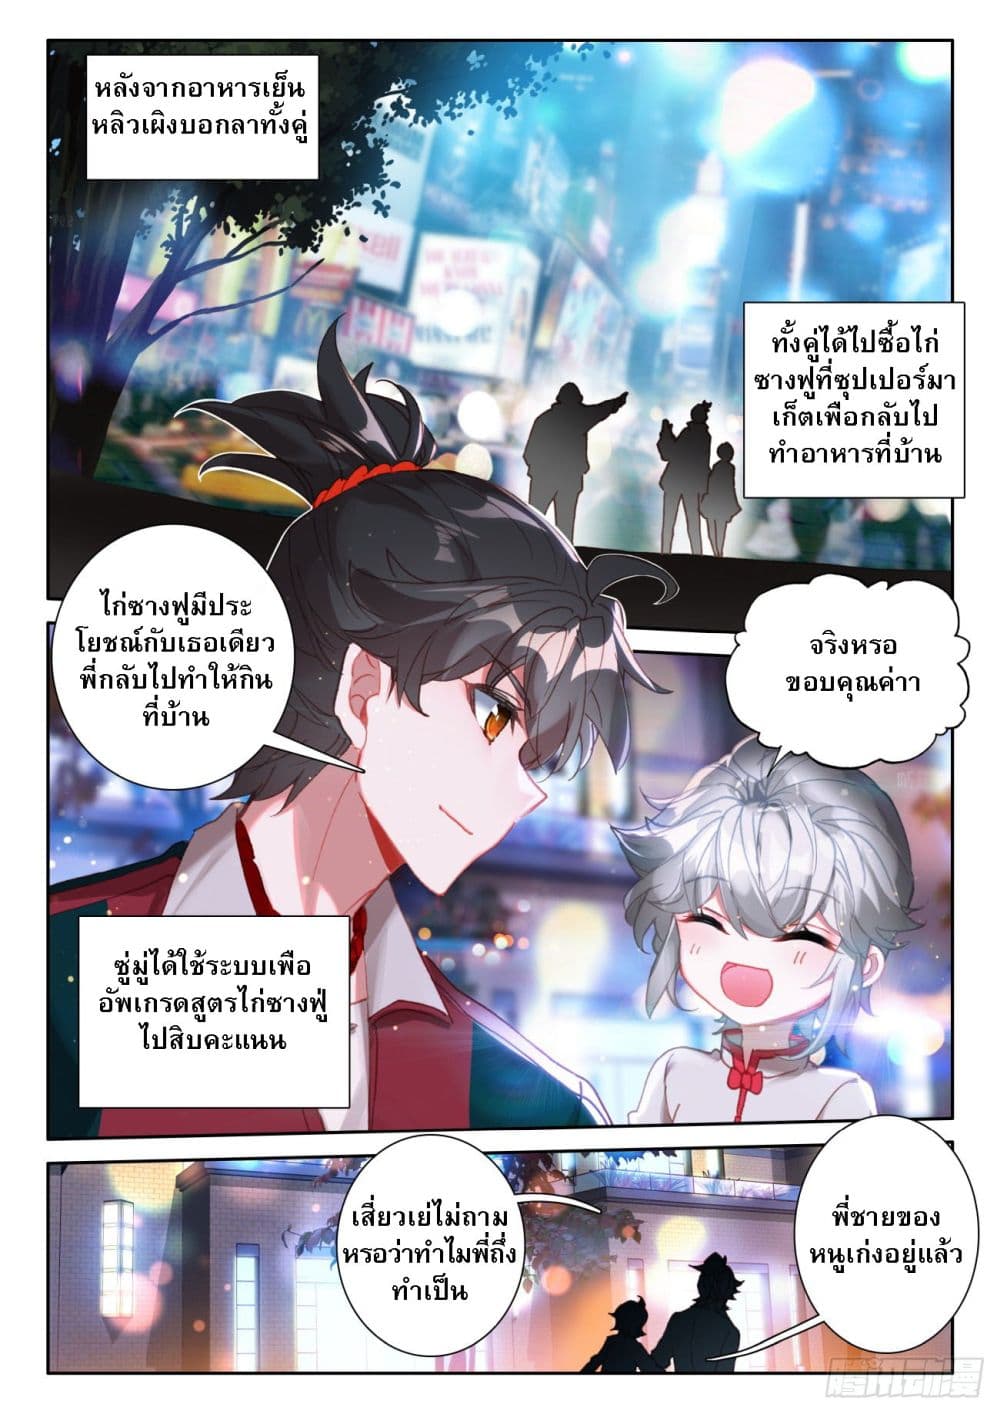 Becoming Immortal by Paying Cash ตอนที่ 9 (6)